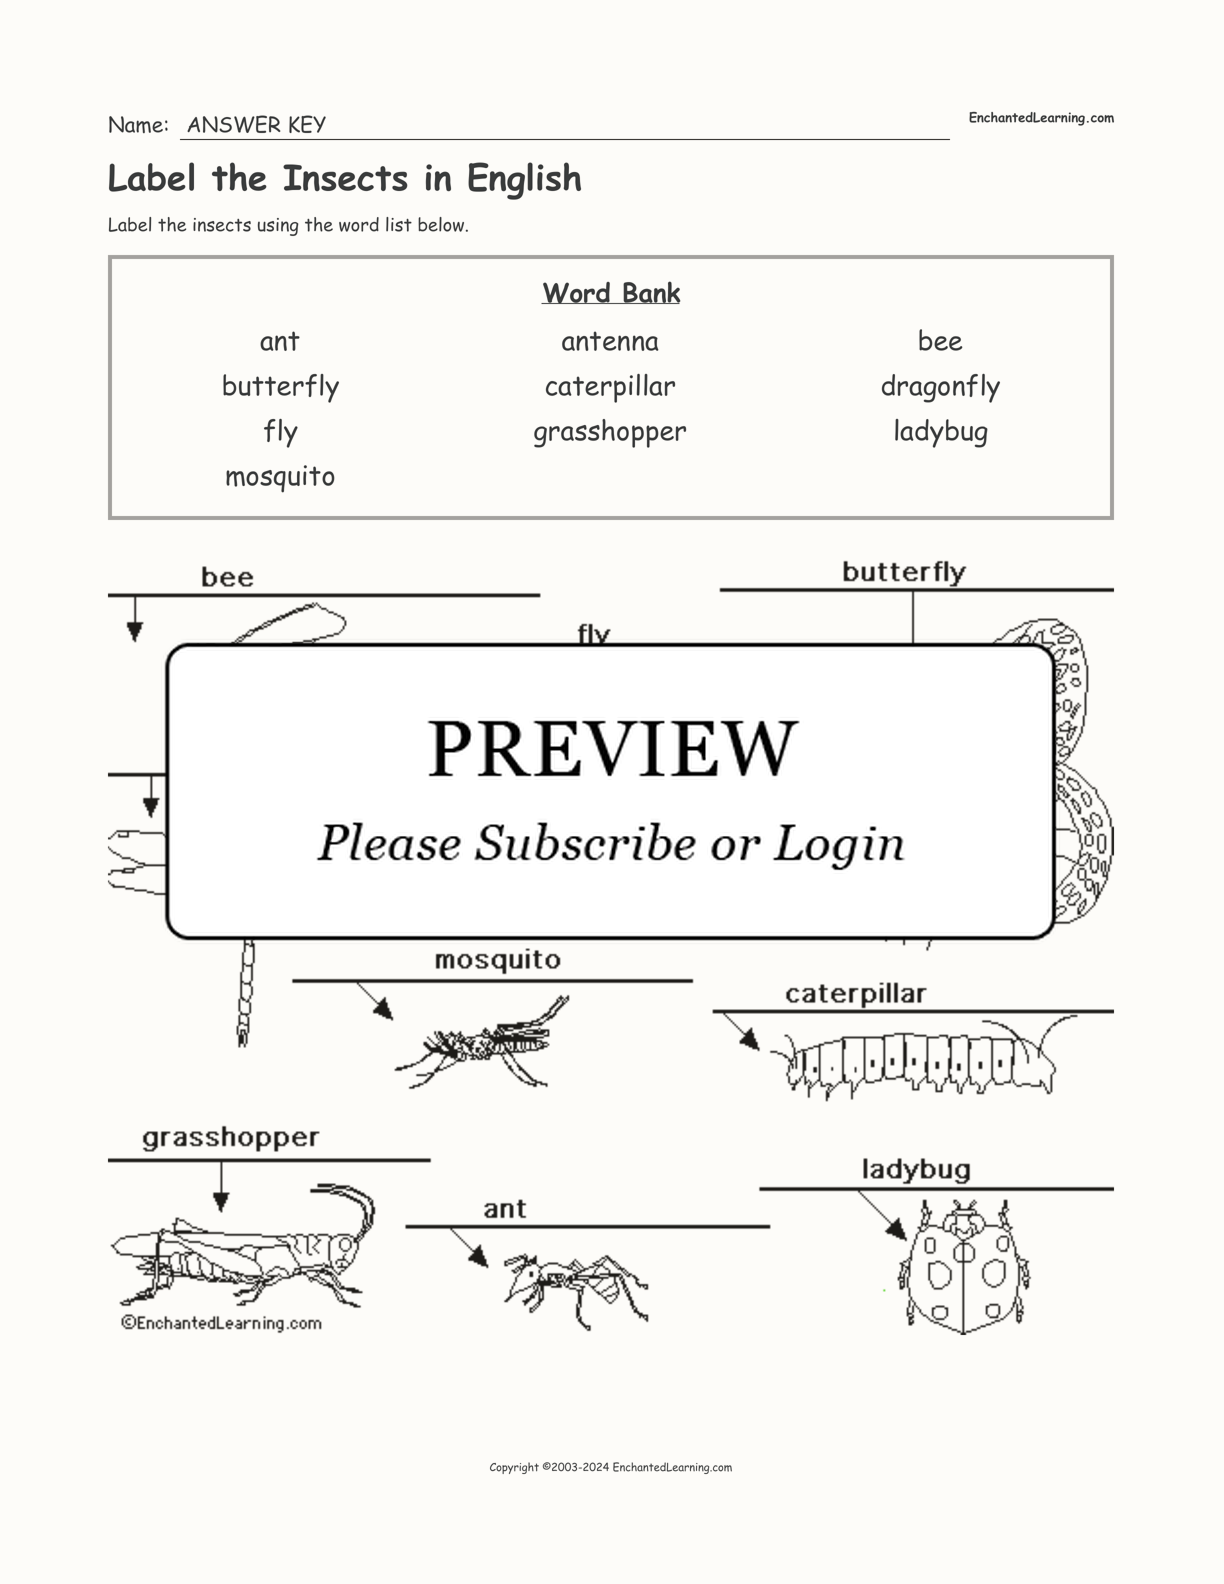 Label the Insects in English interactive worksheet page 2